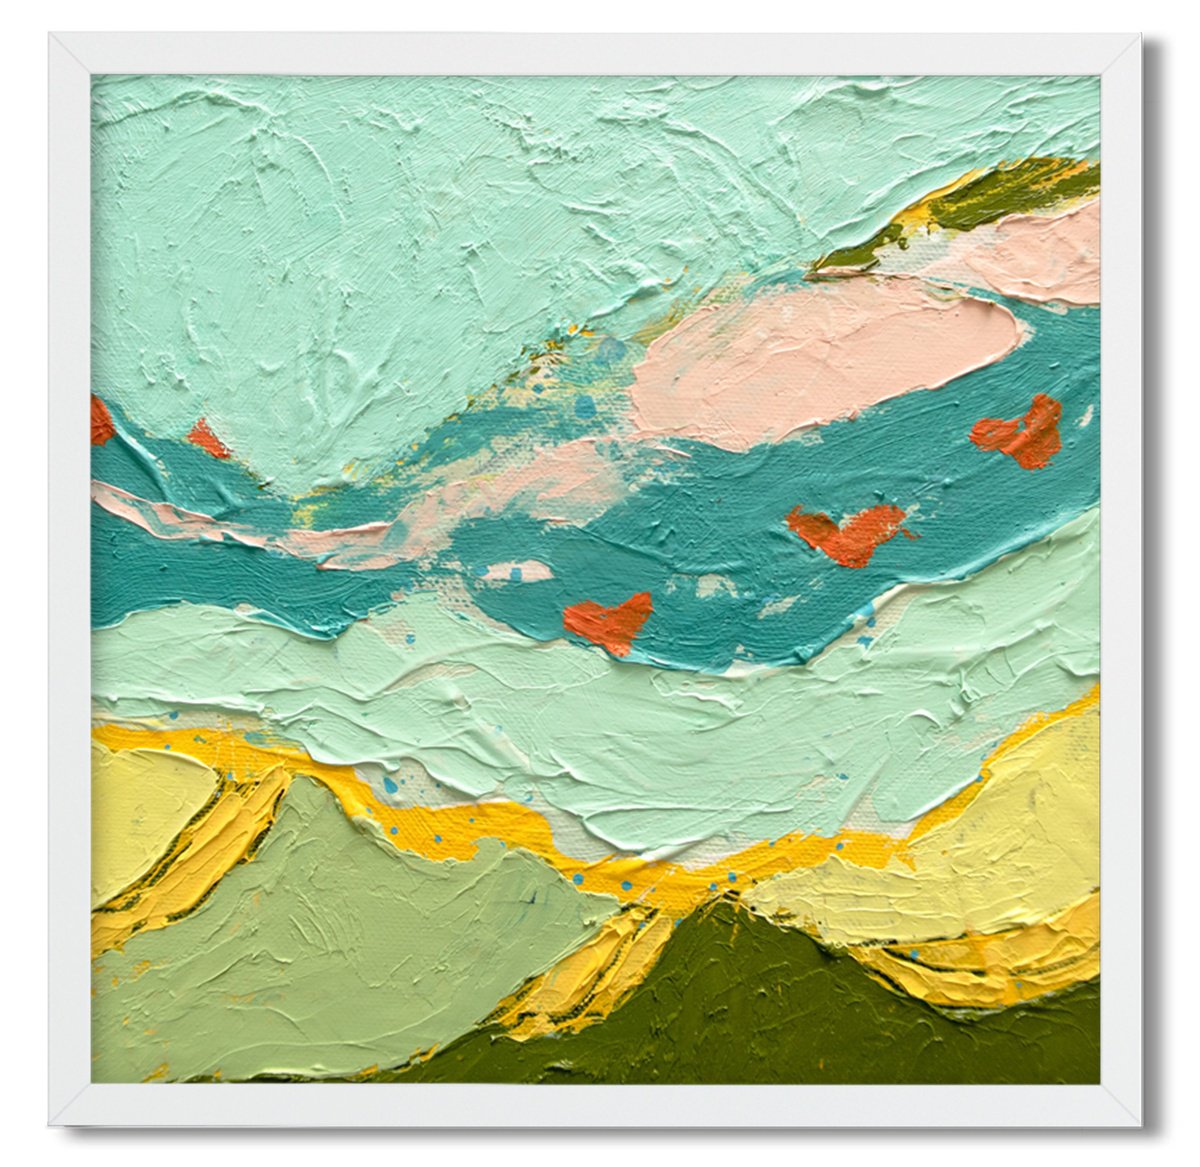 Minty Abstract Landscape Oil Painting by Suzie Cumming